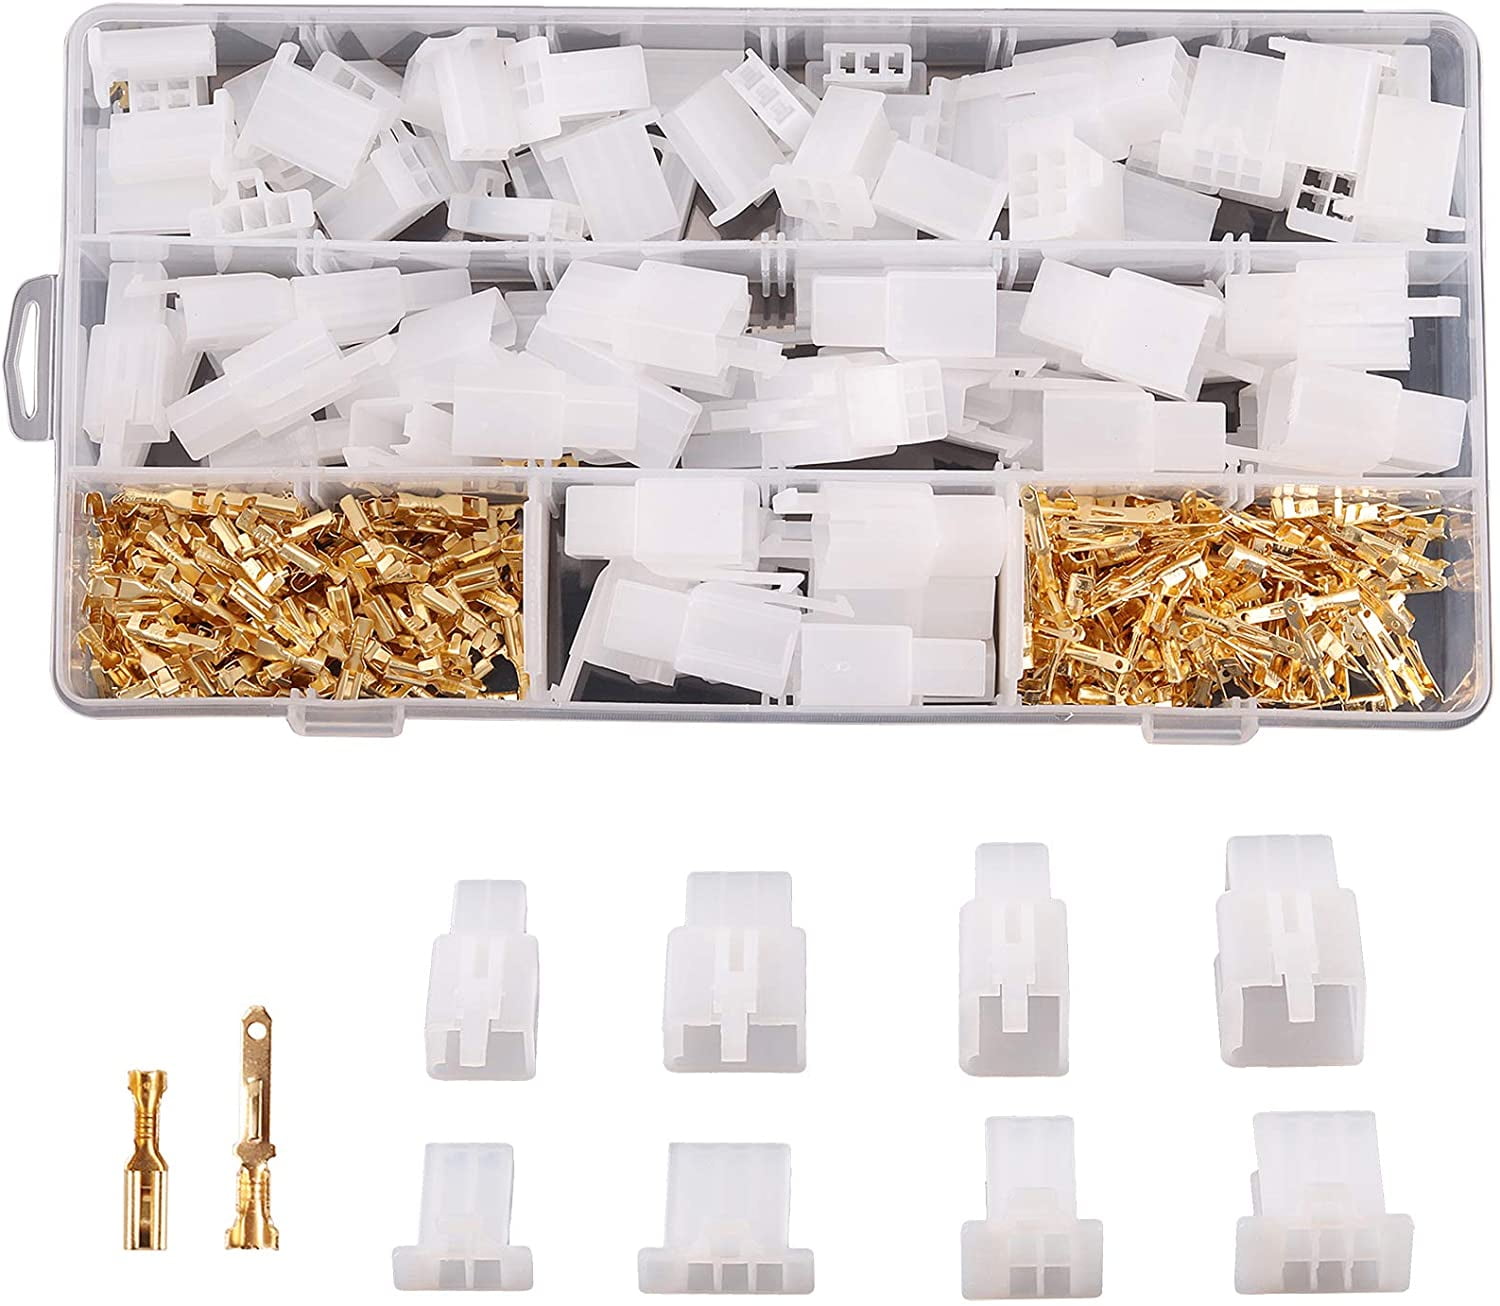 380Pcs Terminal Connectors 2.8MM 2 3 4 6 Pin Electrical Wire Connector Male Female Terminal Plug Housing Kits for Motorcycle Automotive Car and boat